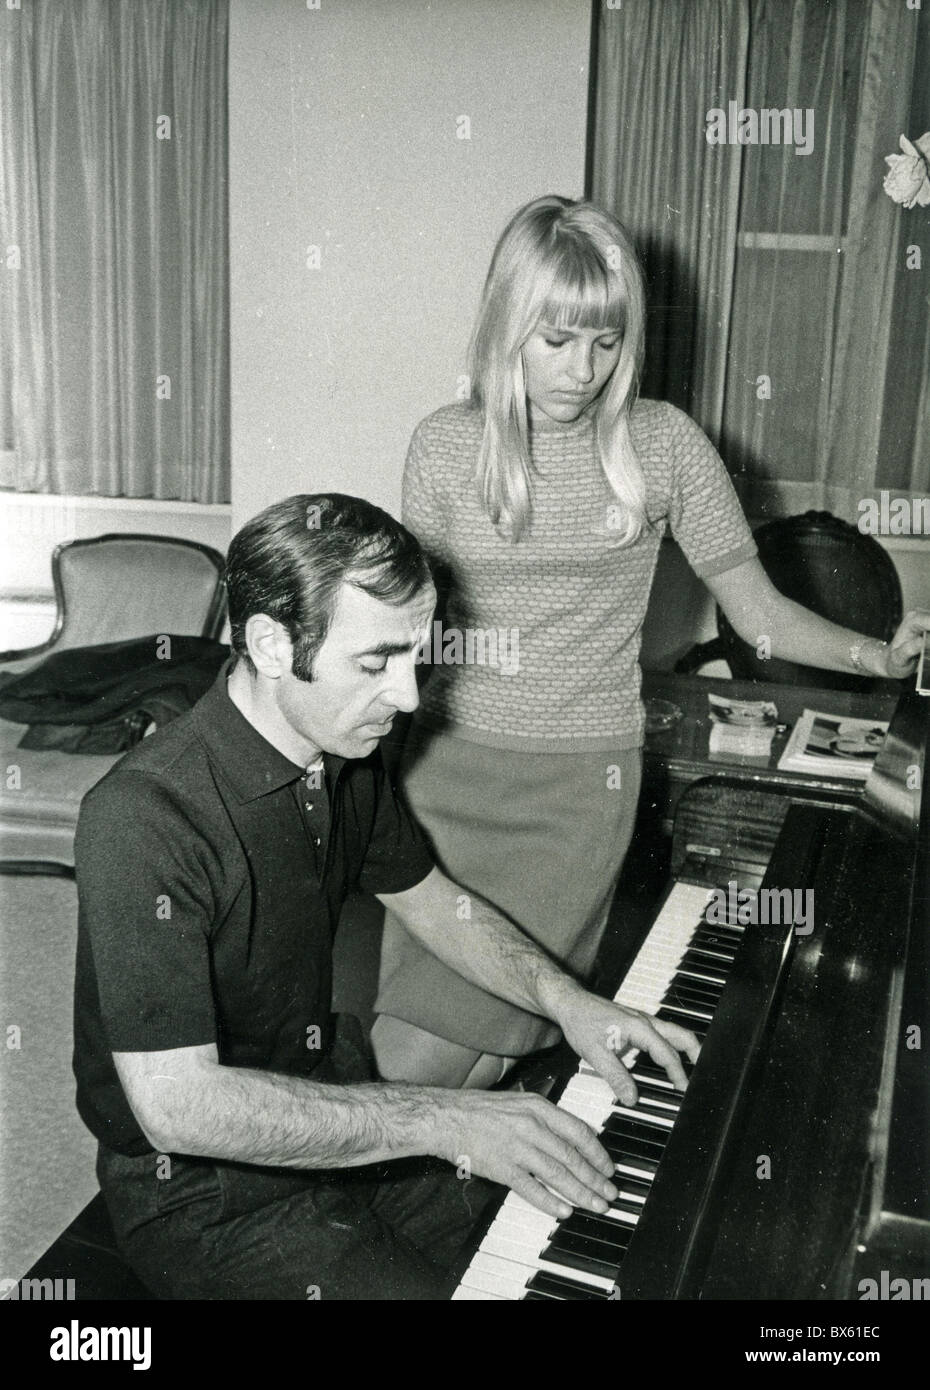 CHARLES AZNAVOUR Armenian-French cantante, compositor y actor Foto de stock